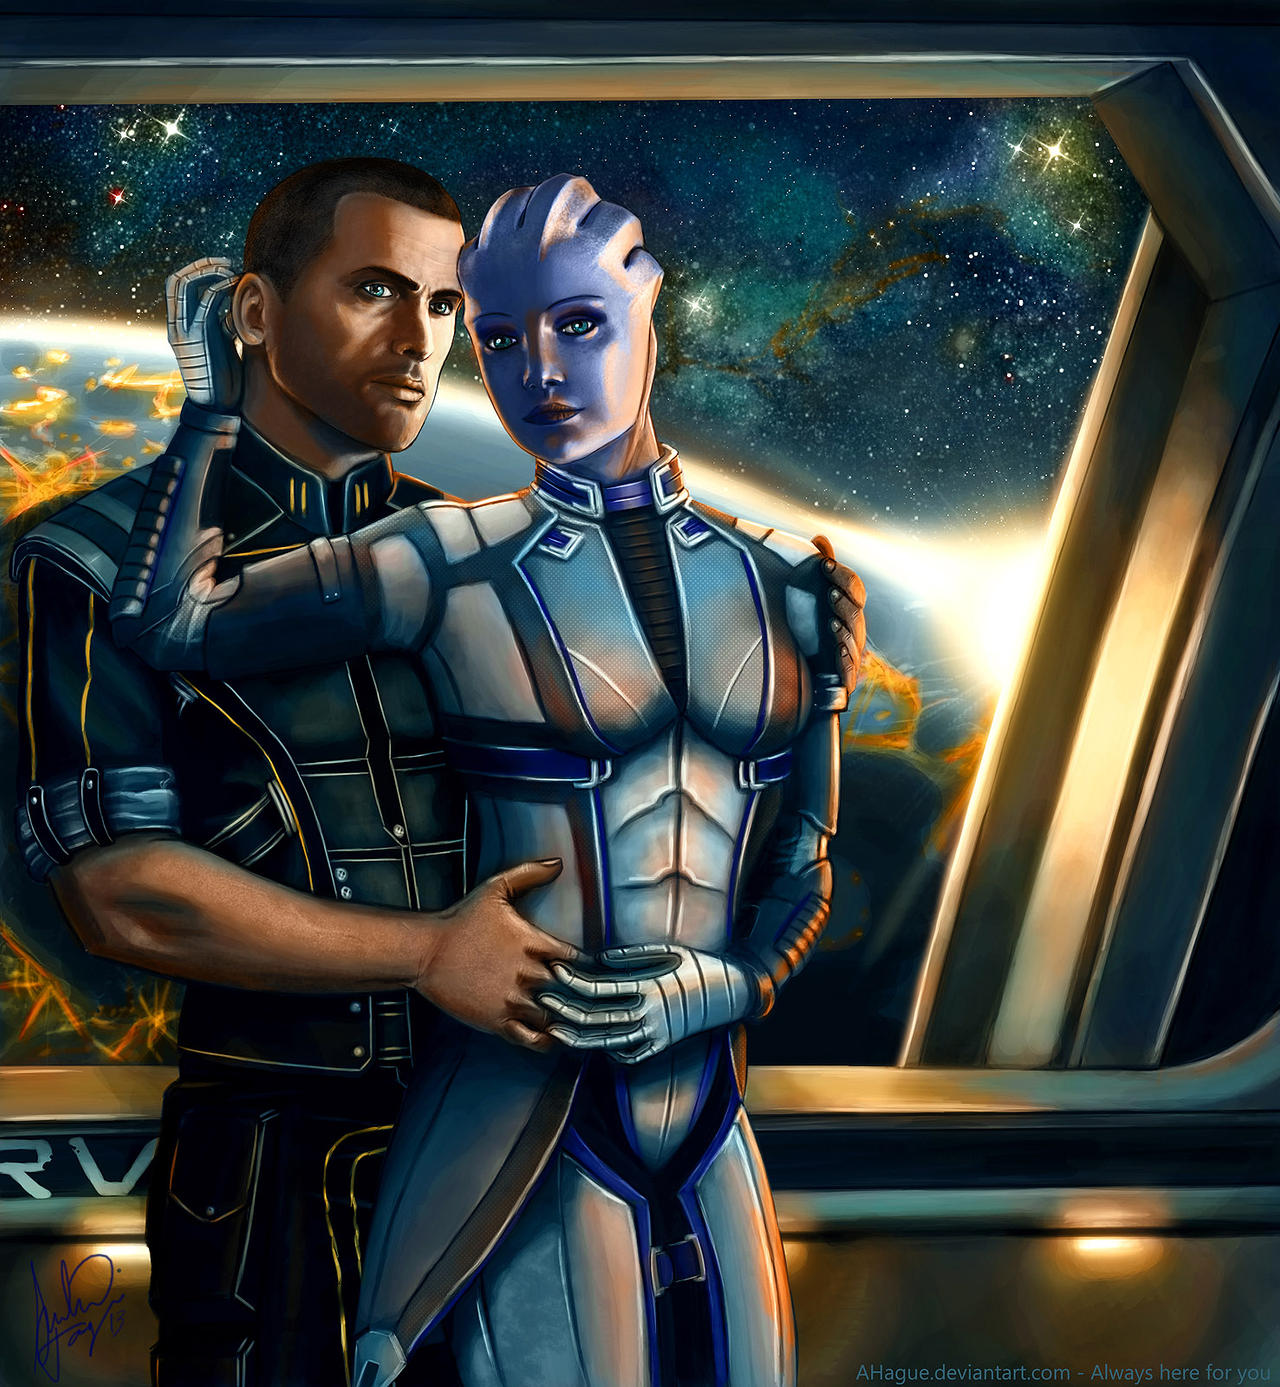 liara_and_shepard___always_here_for_you__version_2_by_ahague-d67e1yf.jpg